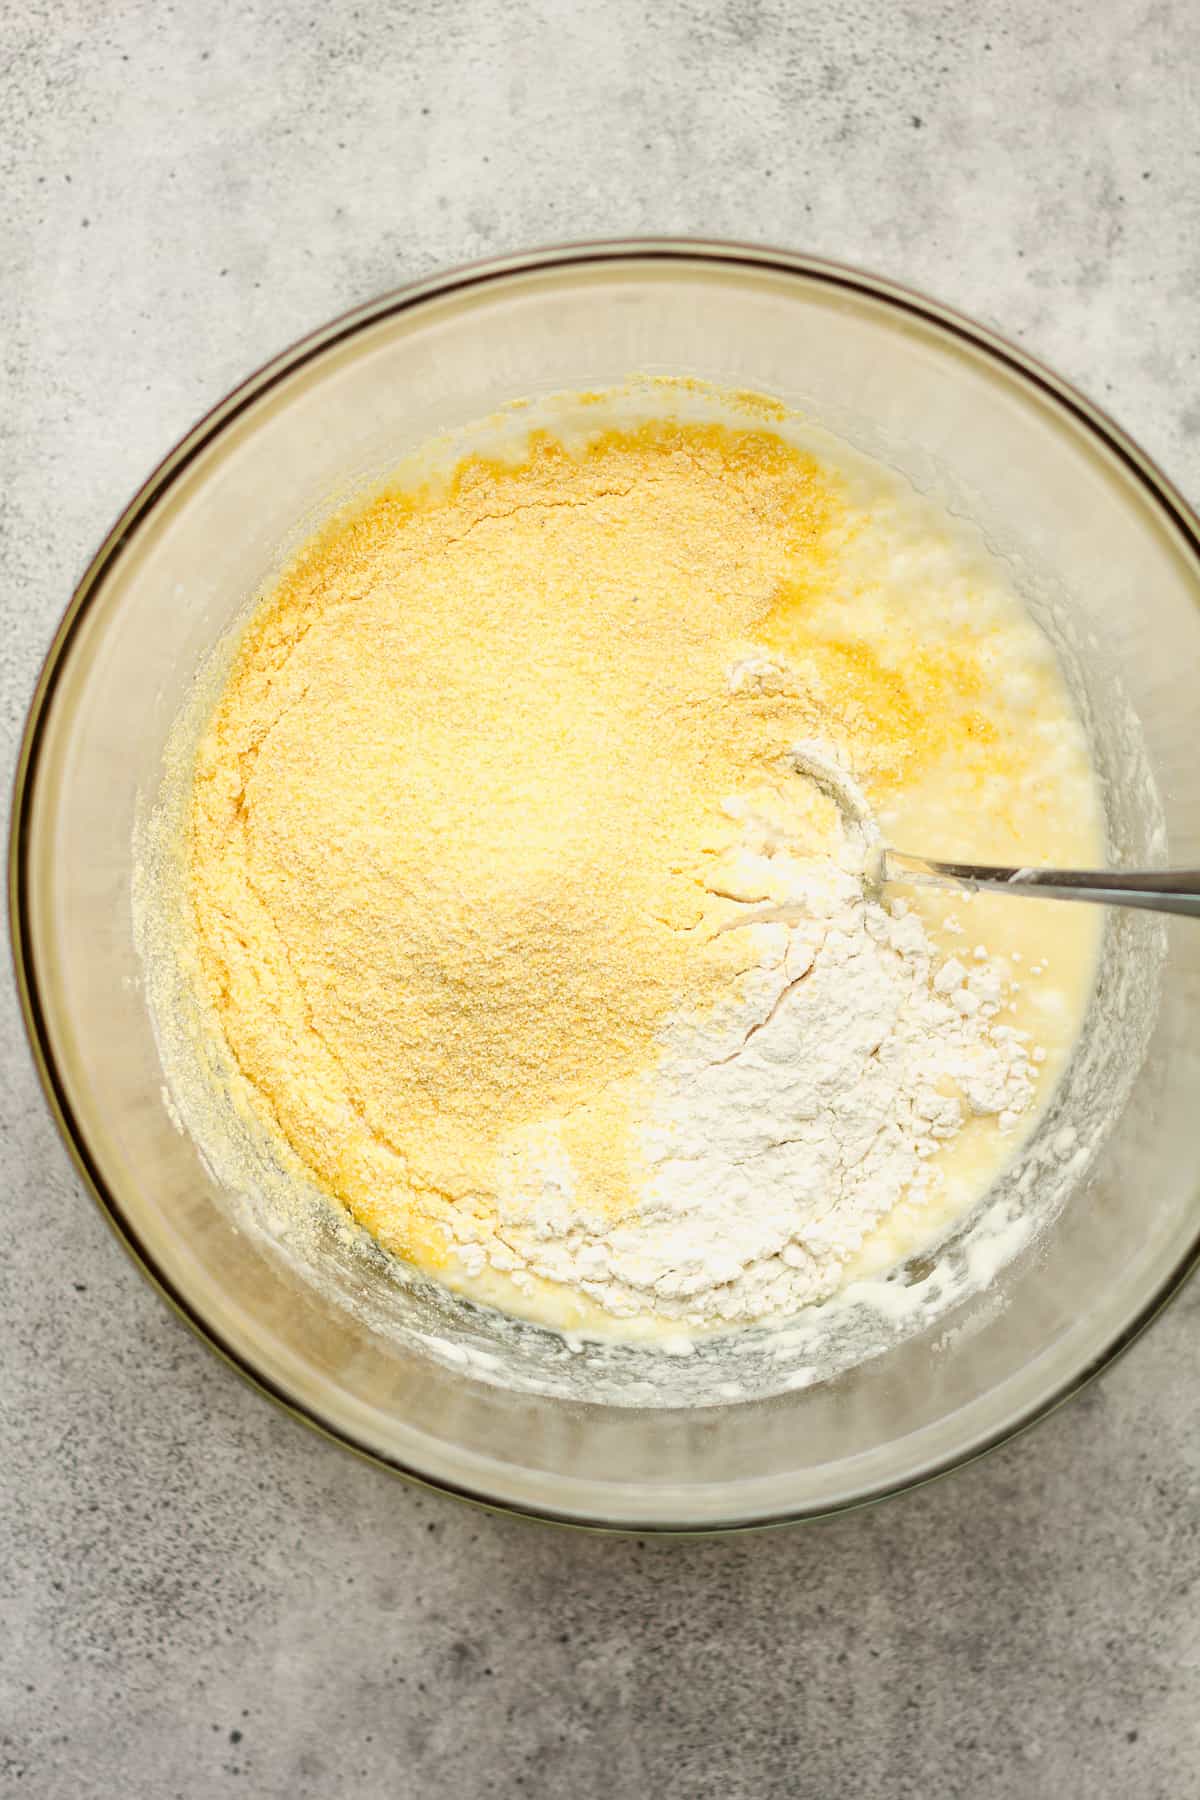 A bowl of the cornbread batter with the flour and cornmeal on top.